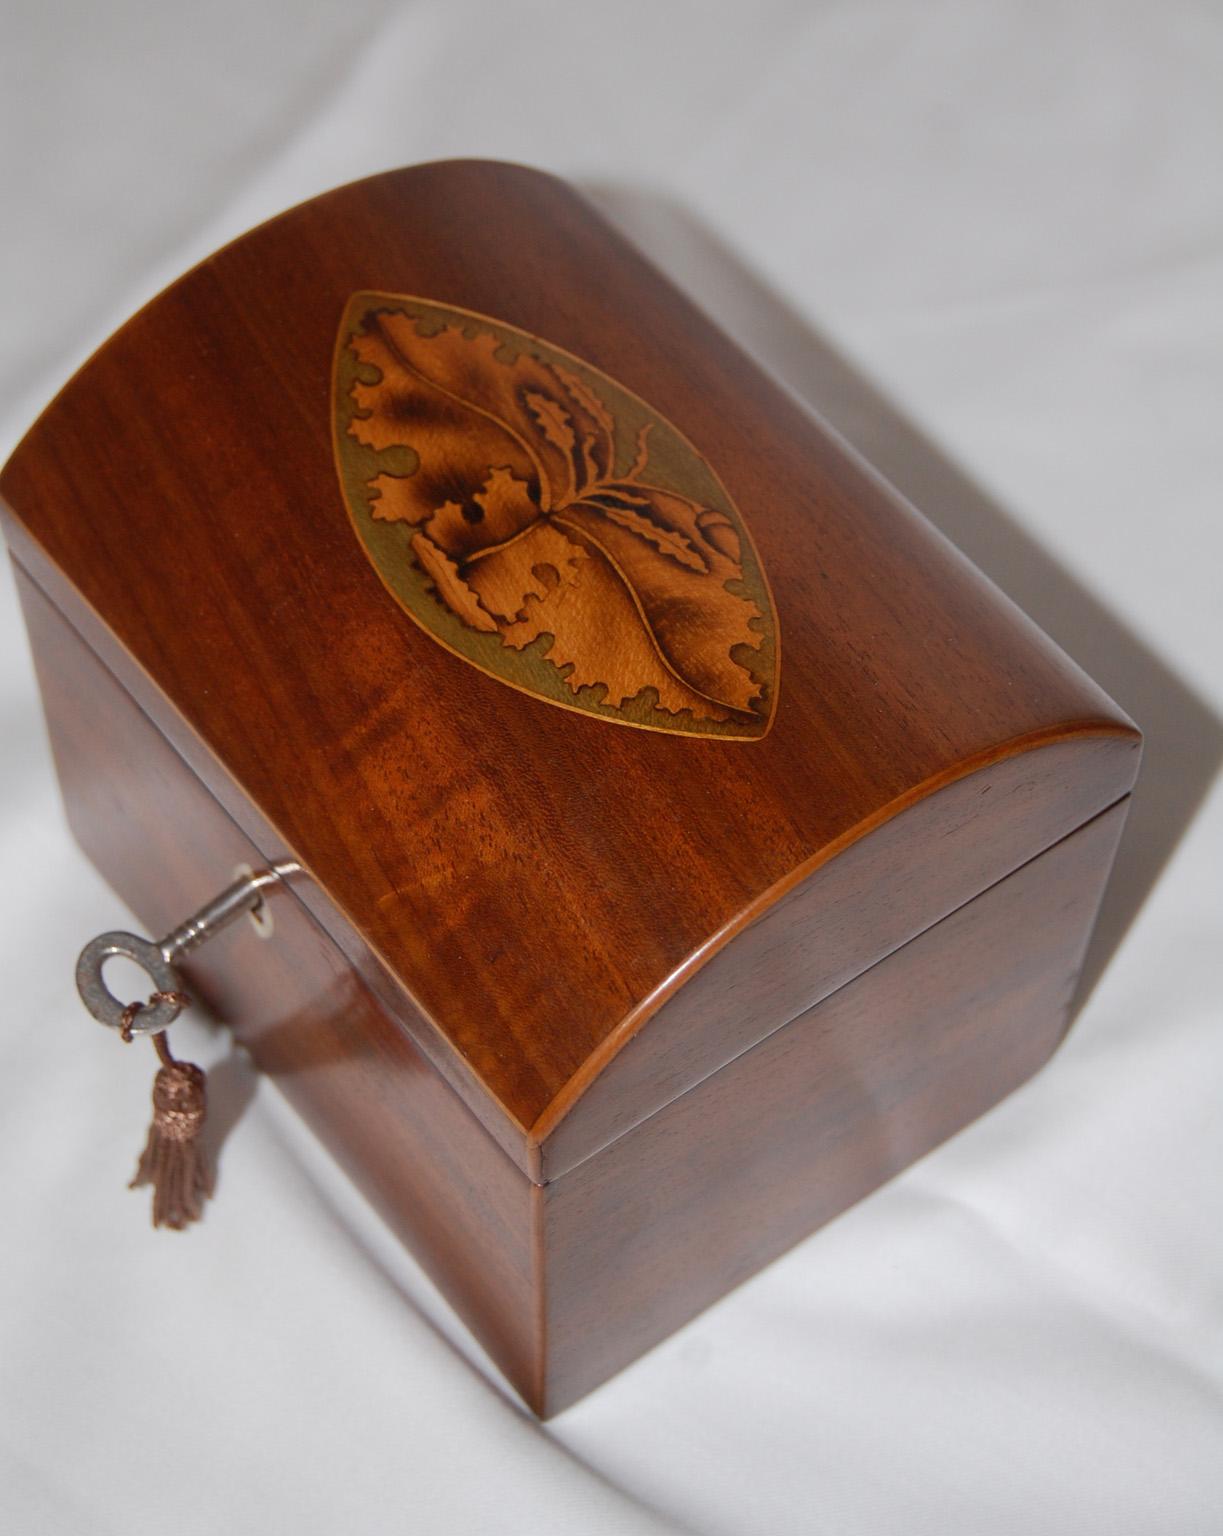   English Georgian mahogany domed top tea caddy.  This single tea caddy has a sycamore oval inlay to the lid with shaded boxwood oak leaves and acorn, inlaid into the oval.  The sycamore retains its natural green color which sets off the  shaded